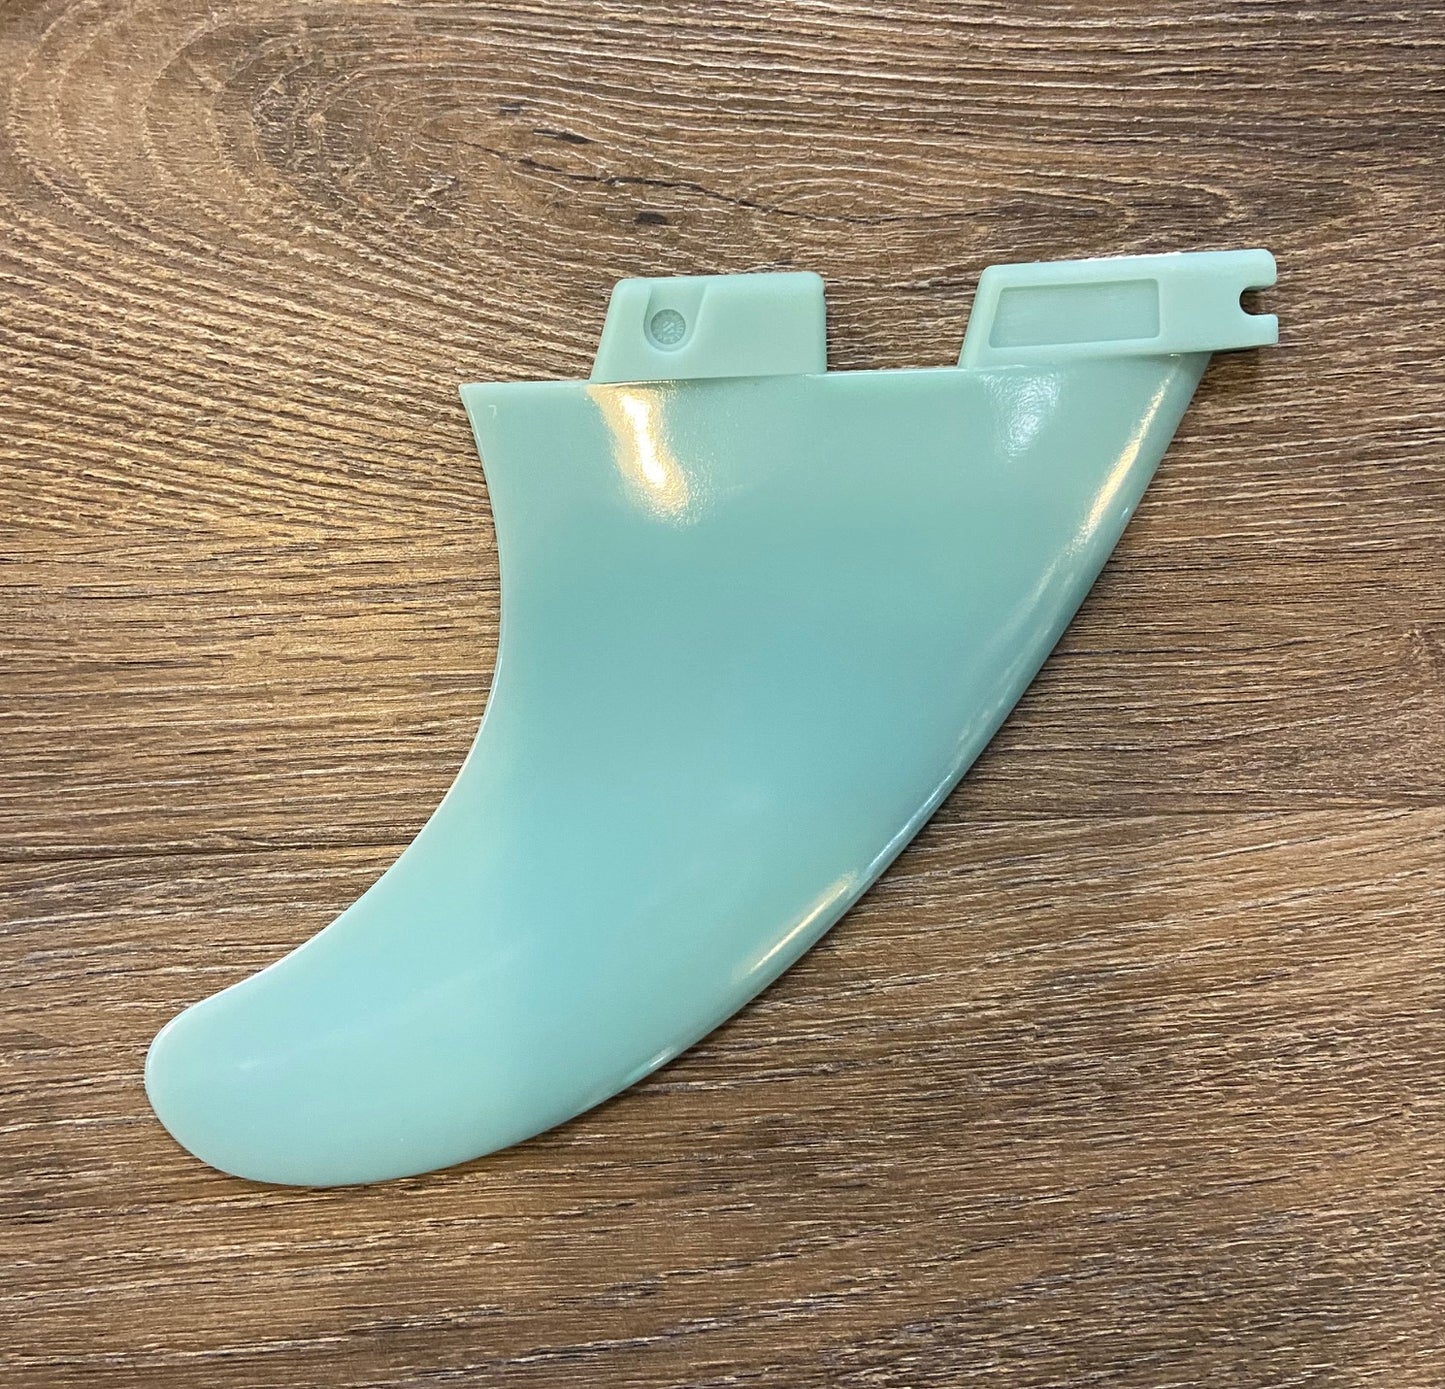 Fins to fit FCS2 fin systems - Plastic Fins